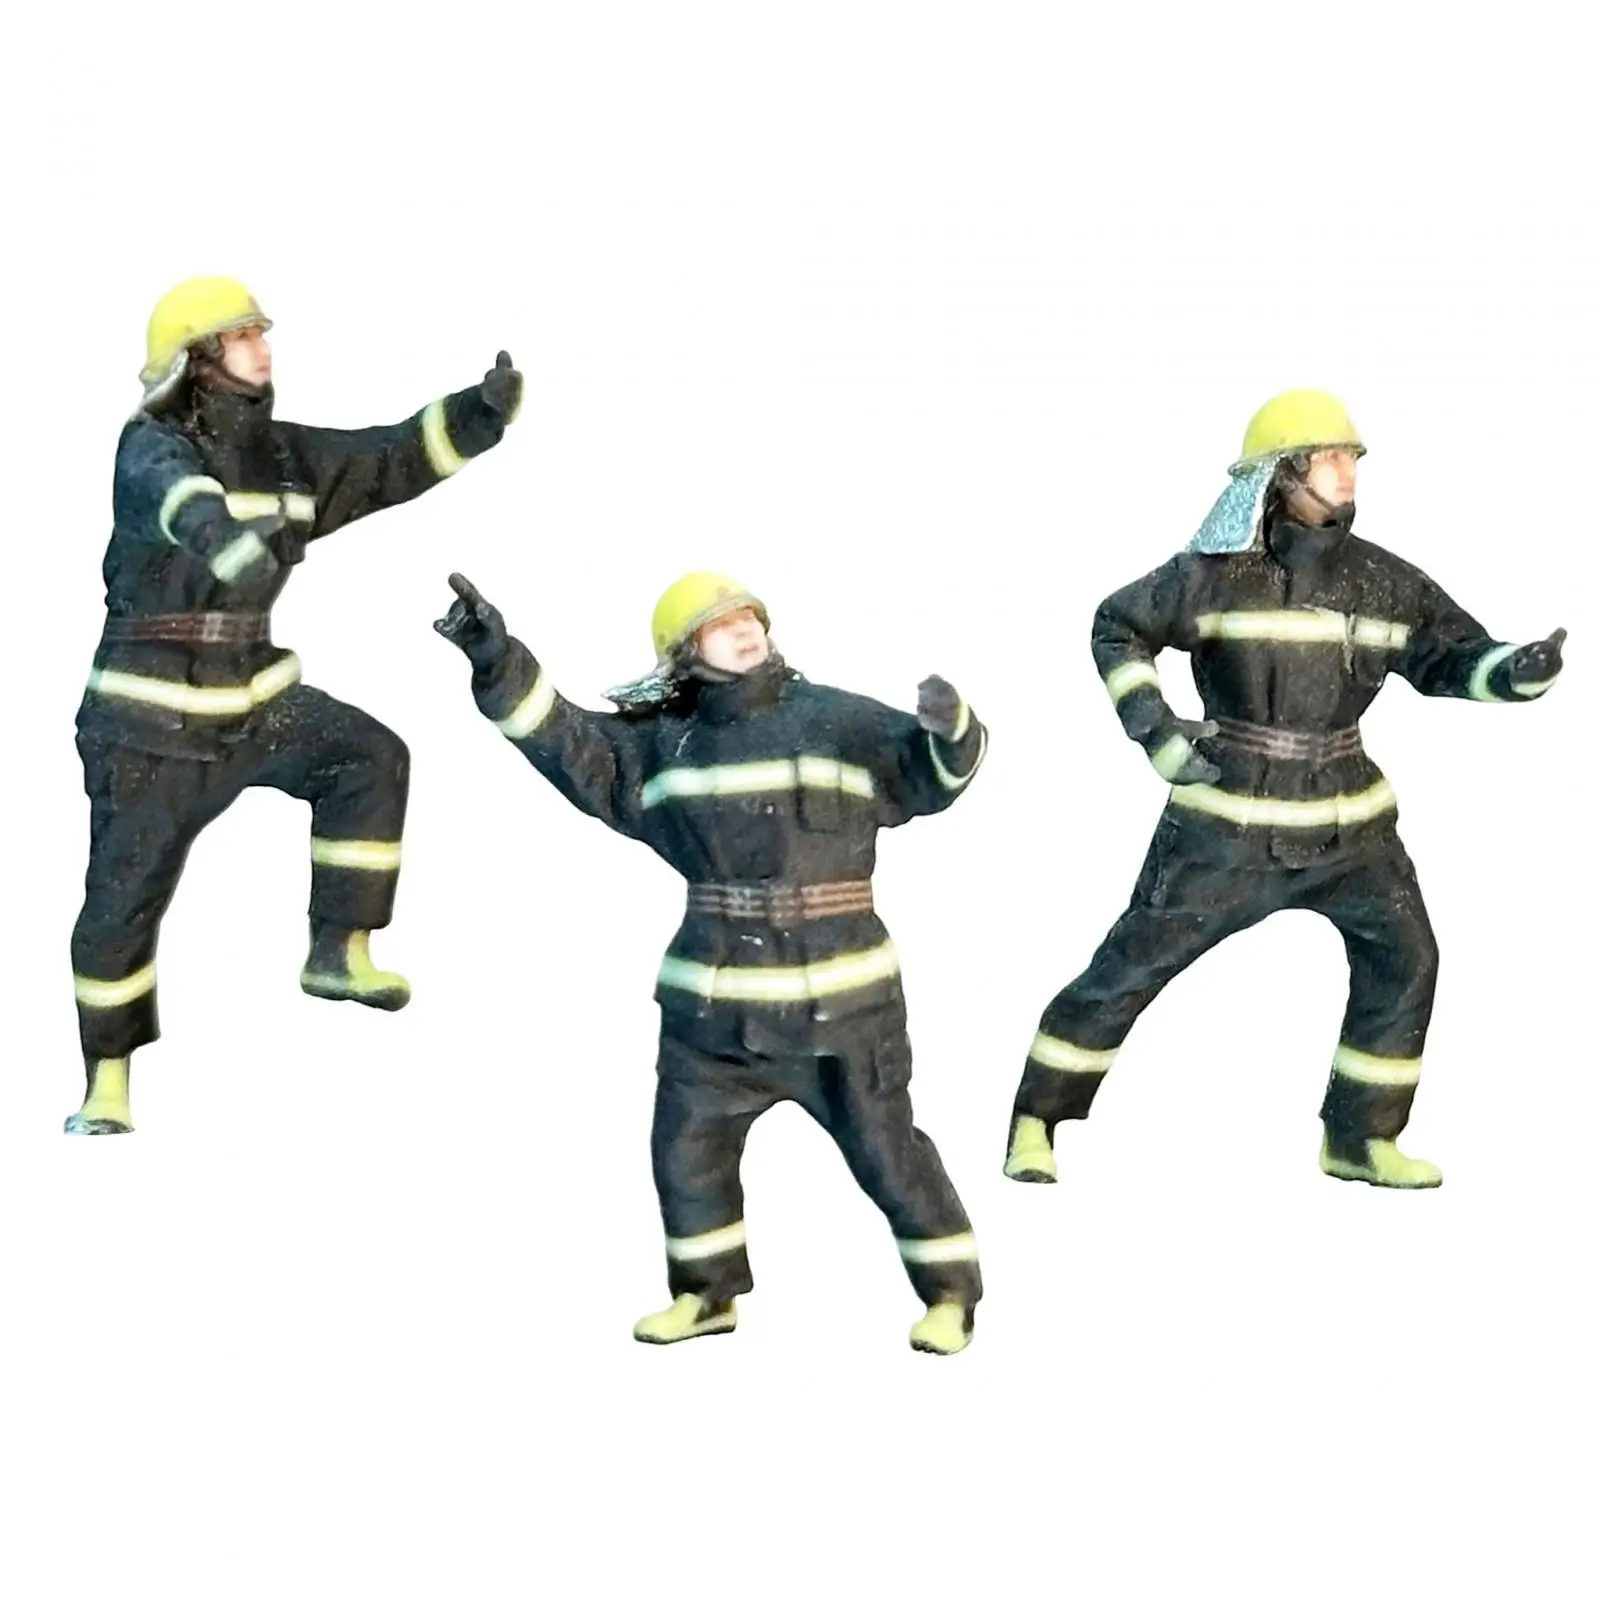 

3 Pieces Firefighter Model Realistic Collectibles Model Trains People Figures for Dollhouse Diorama Miniature Scene Decor Layout